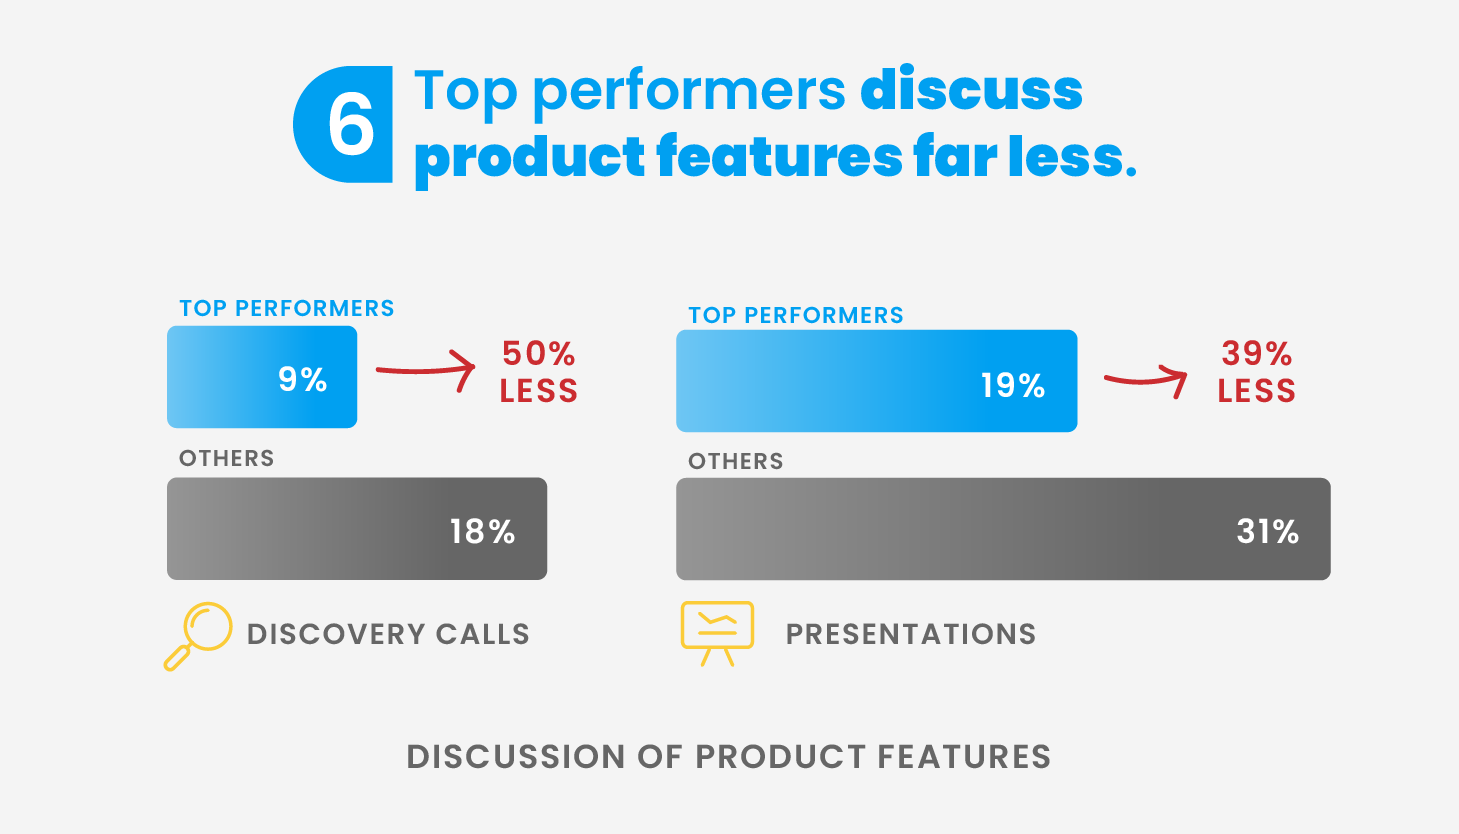 6. Top performers discuss product features far less